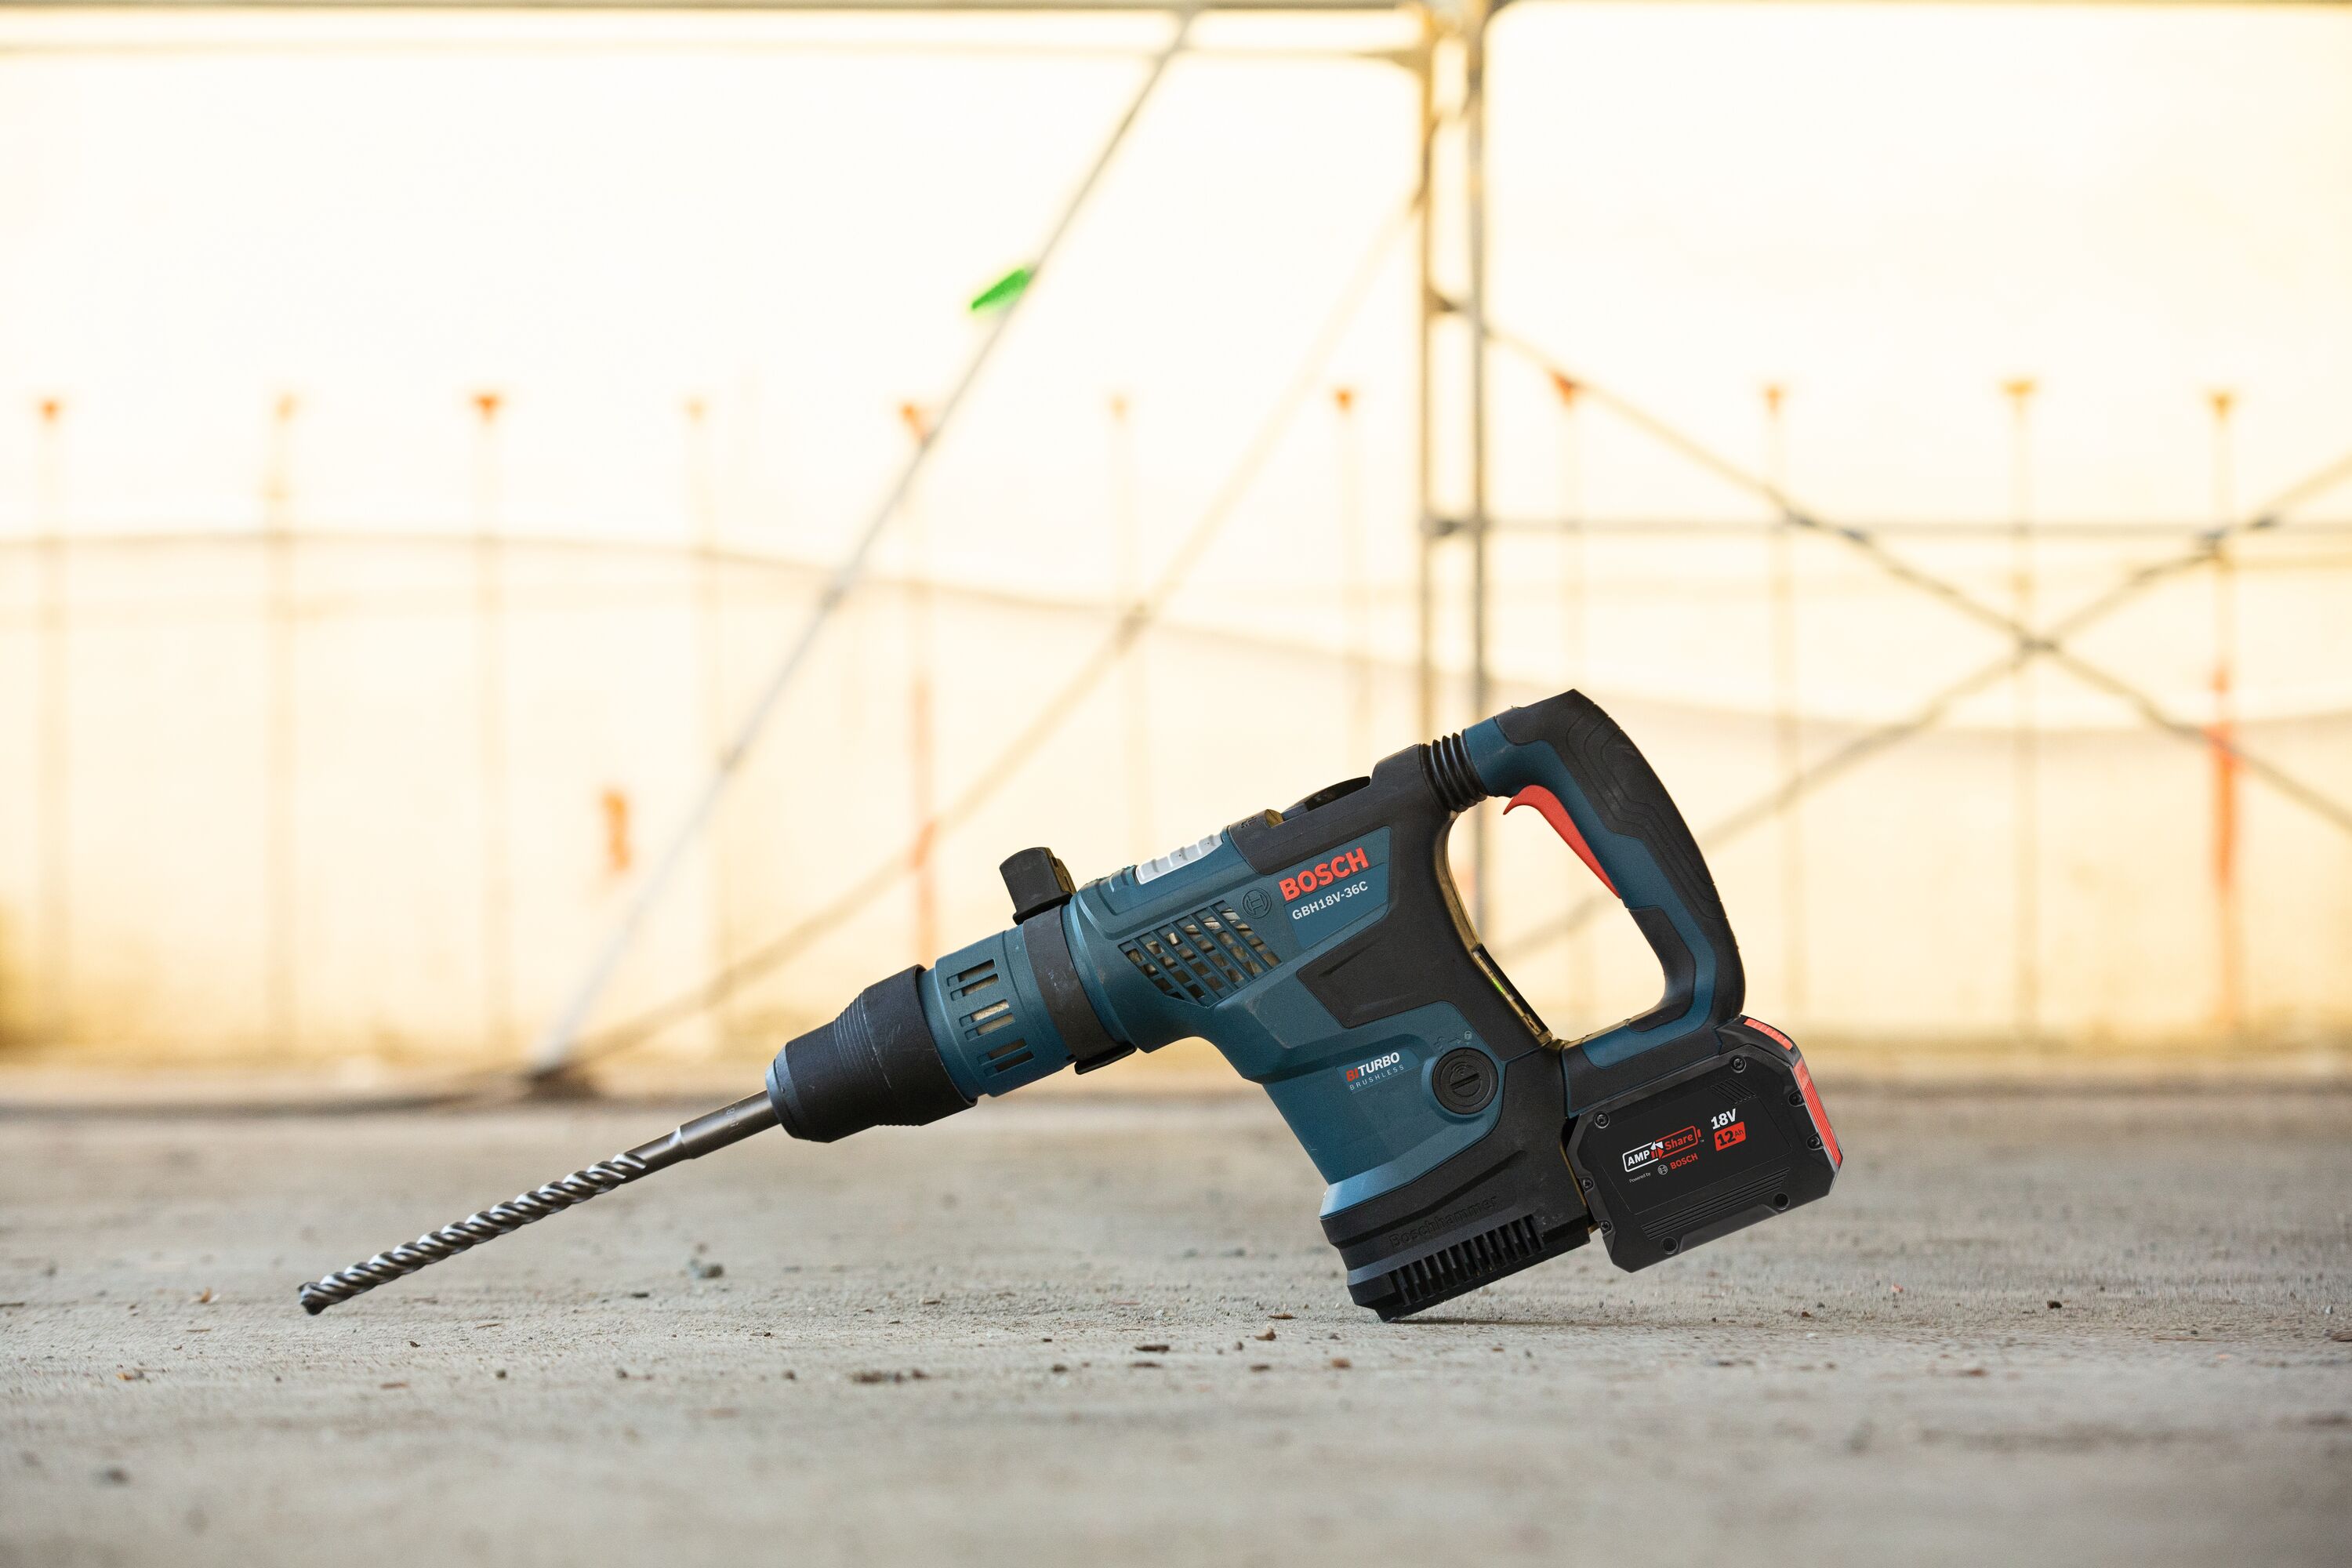 Bosch PROFACTOR 18-volt Cordless Rotary Hammer Hammer (Bare the Sds-max Rotary Tool) Speed department Drills in Variable 1-9/16-in 8-Amp Drill at